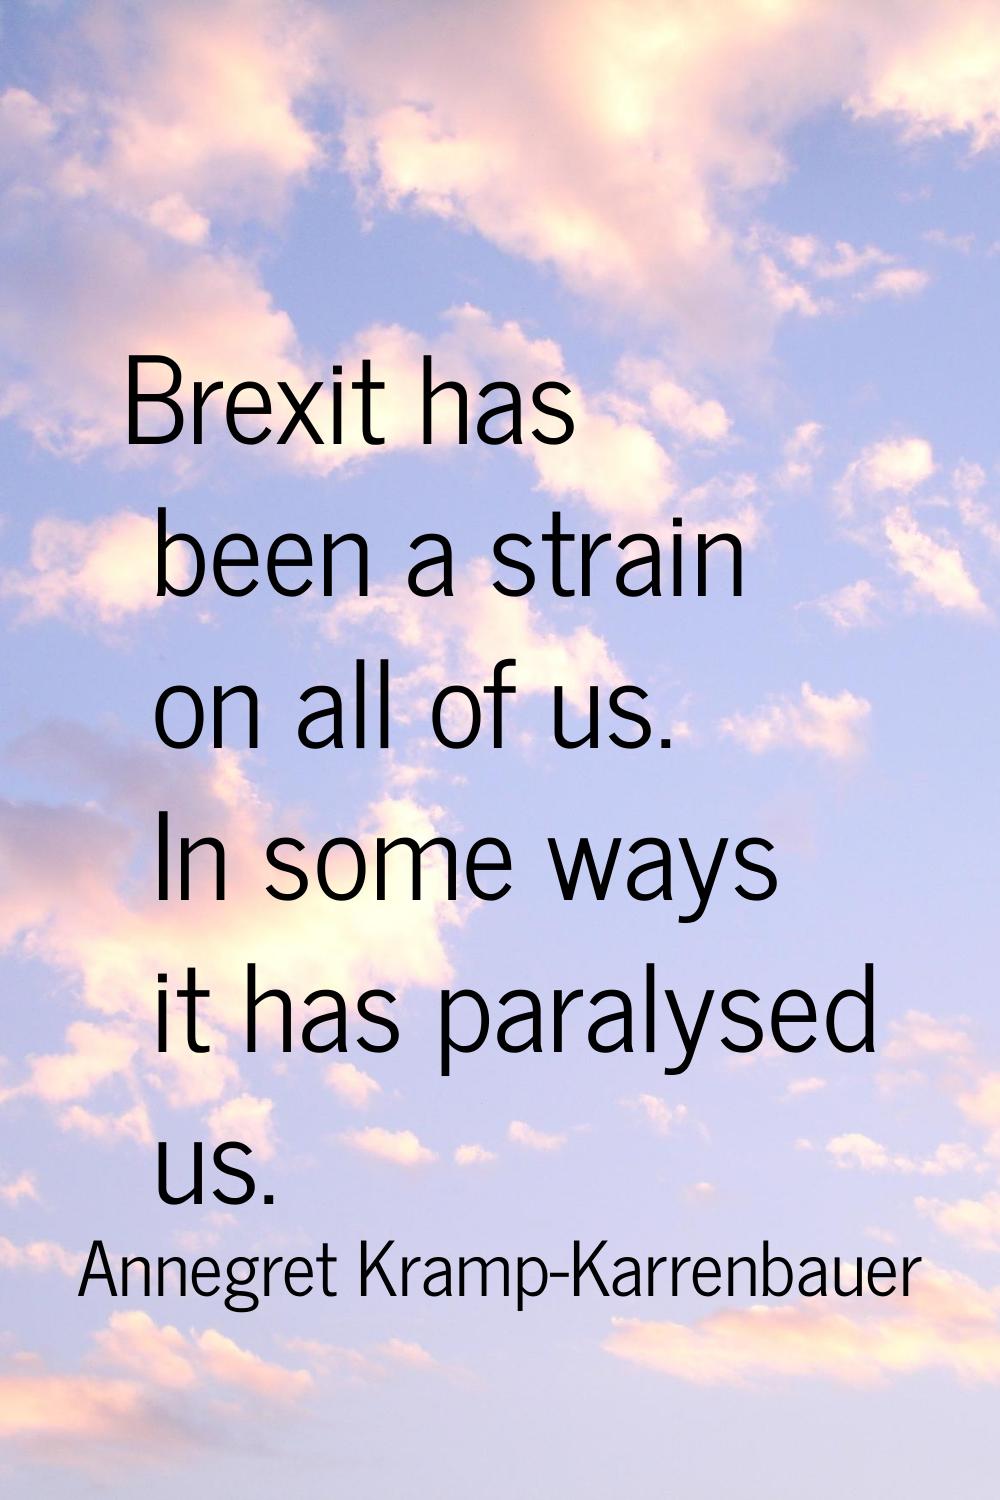 Brexit has been a strain on all of us. In some ways it has paralysed us.